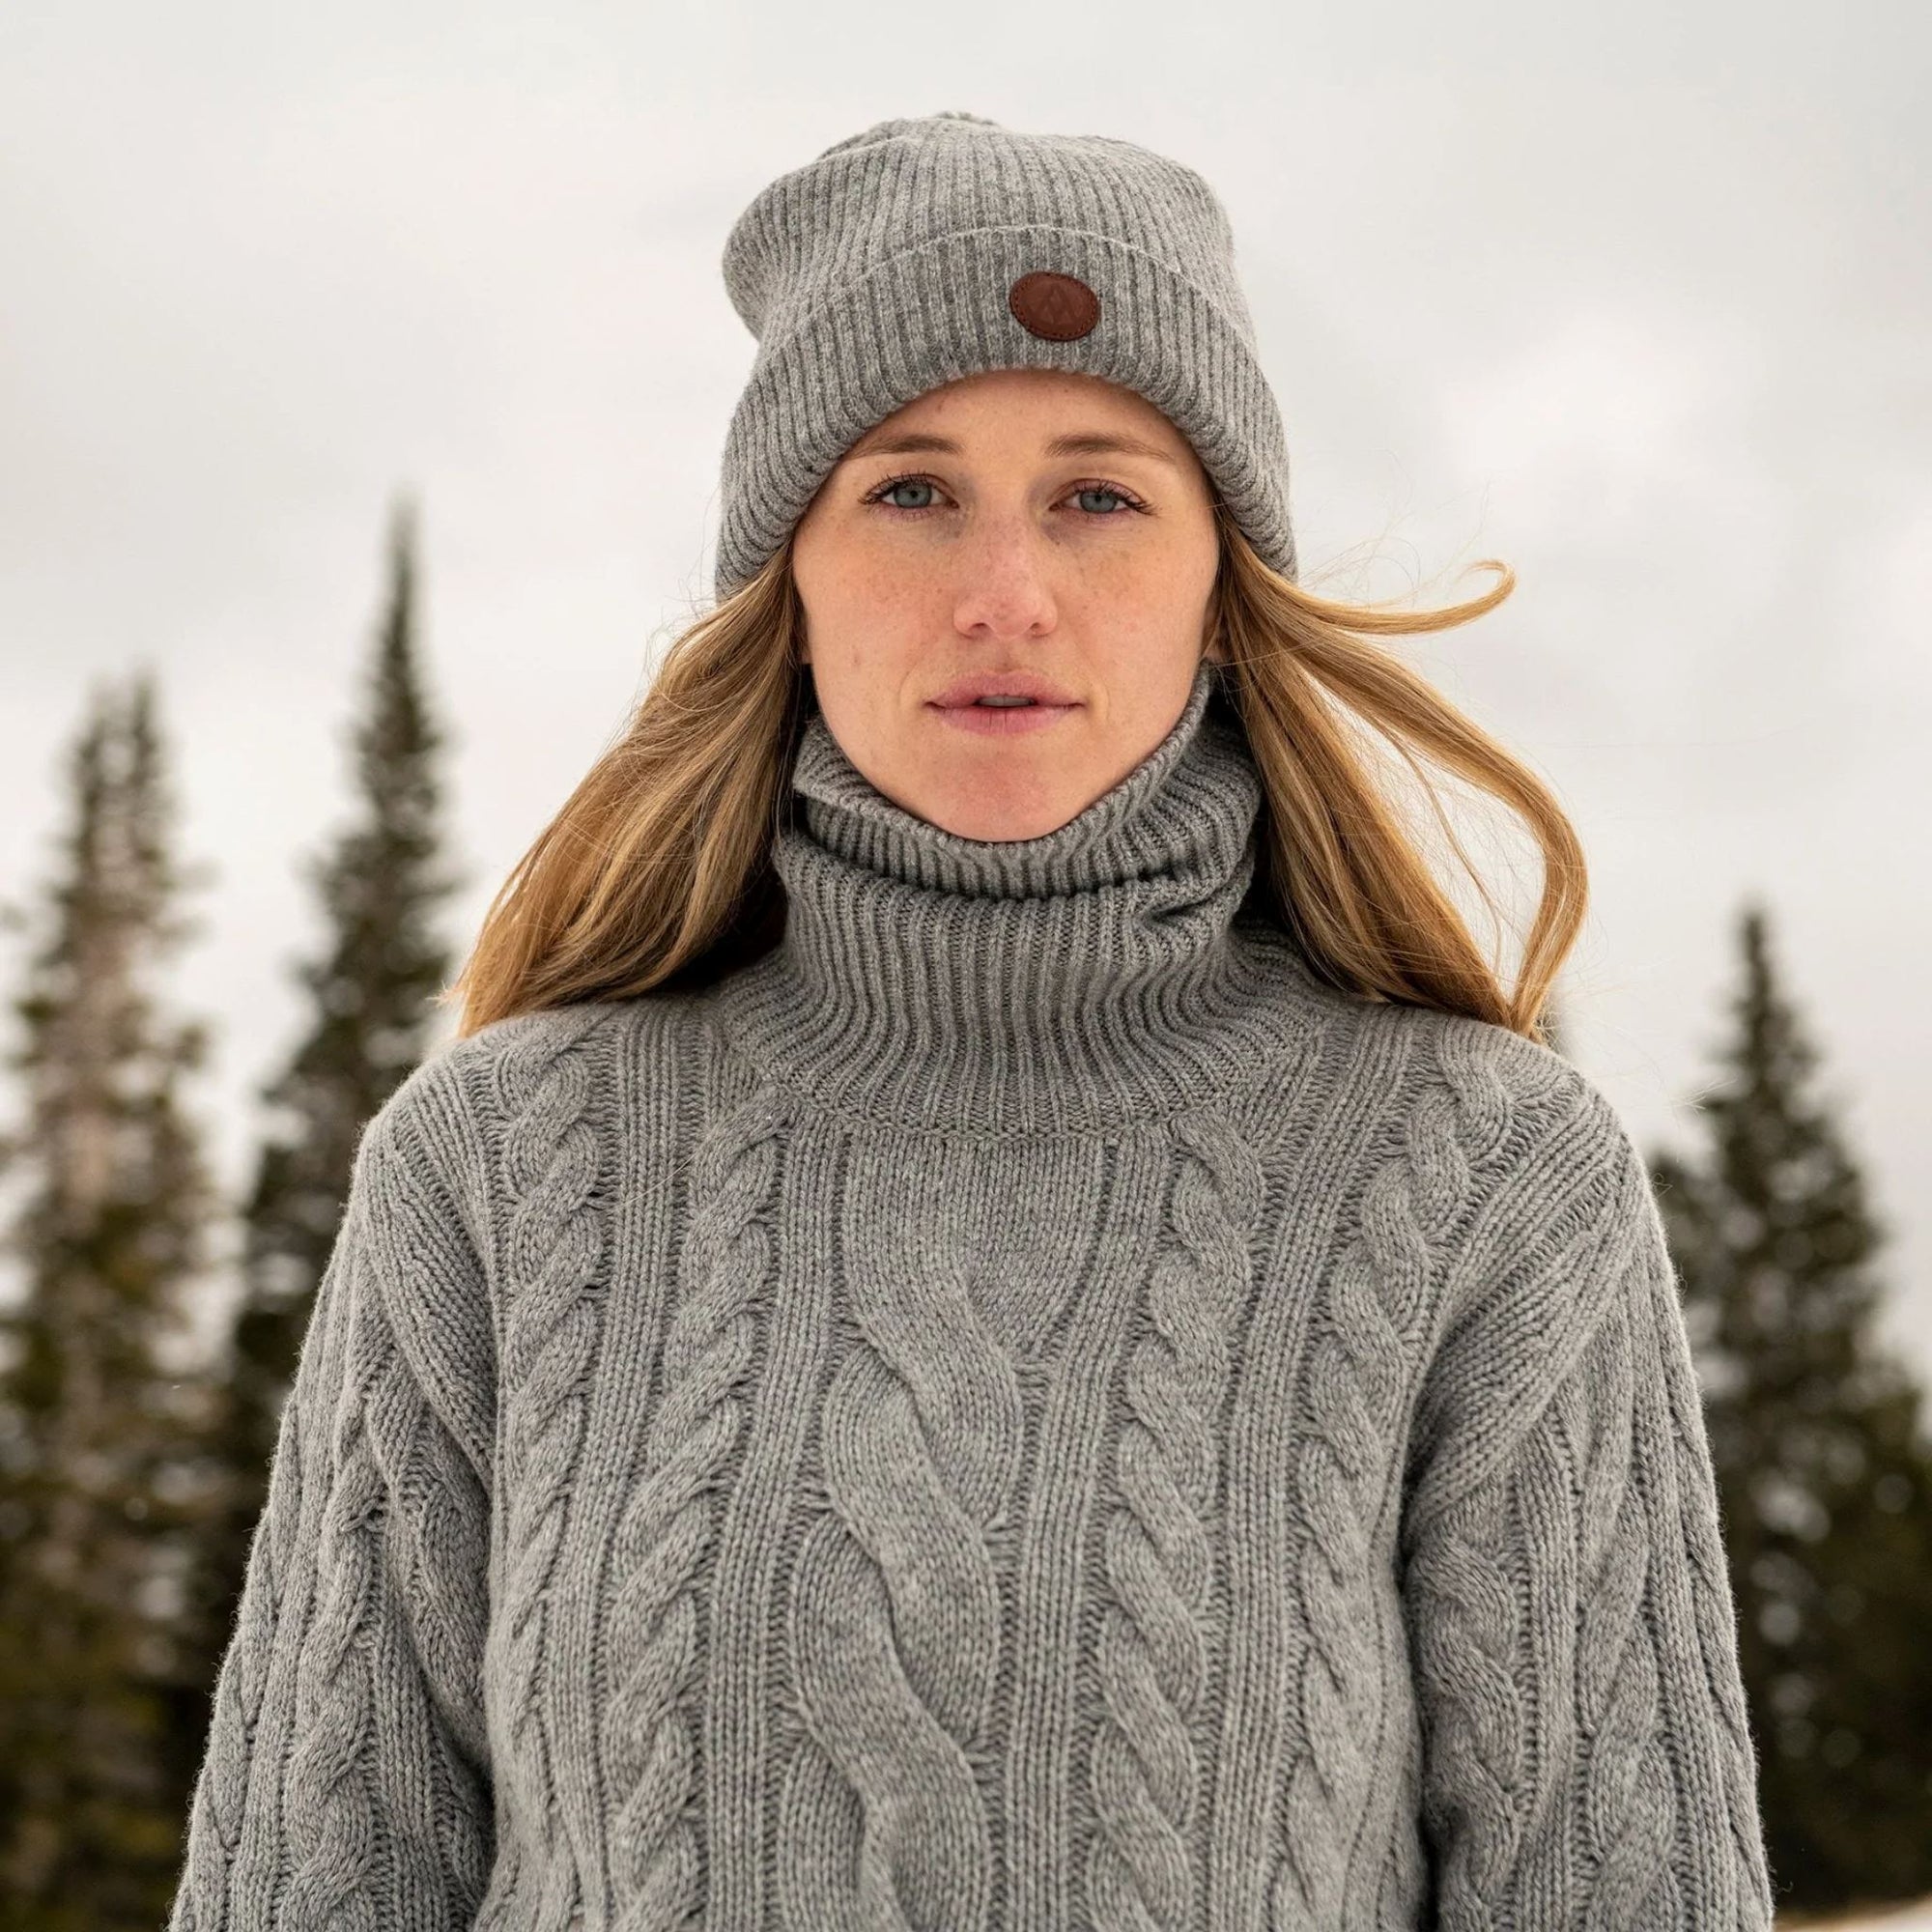 Womens Alps & Meters Classic Cable Knit Sweater - Navy Après | Travel Alps & Meters XS INTL / XS AU 